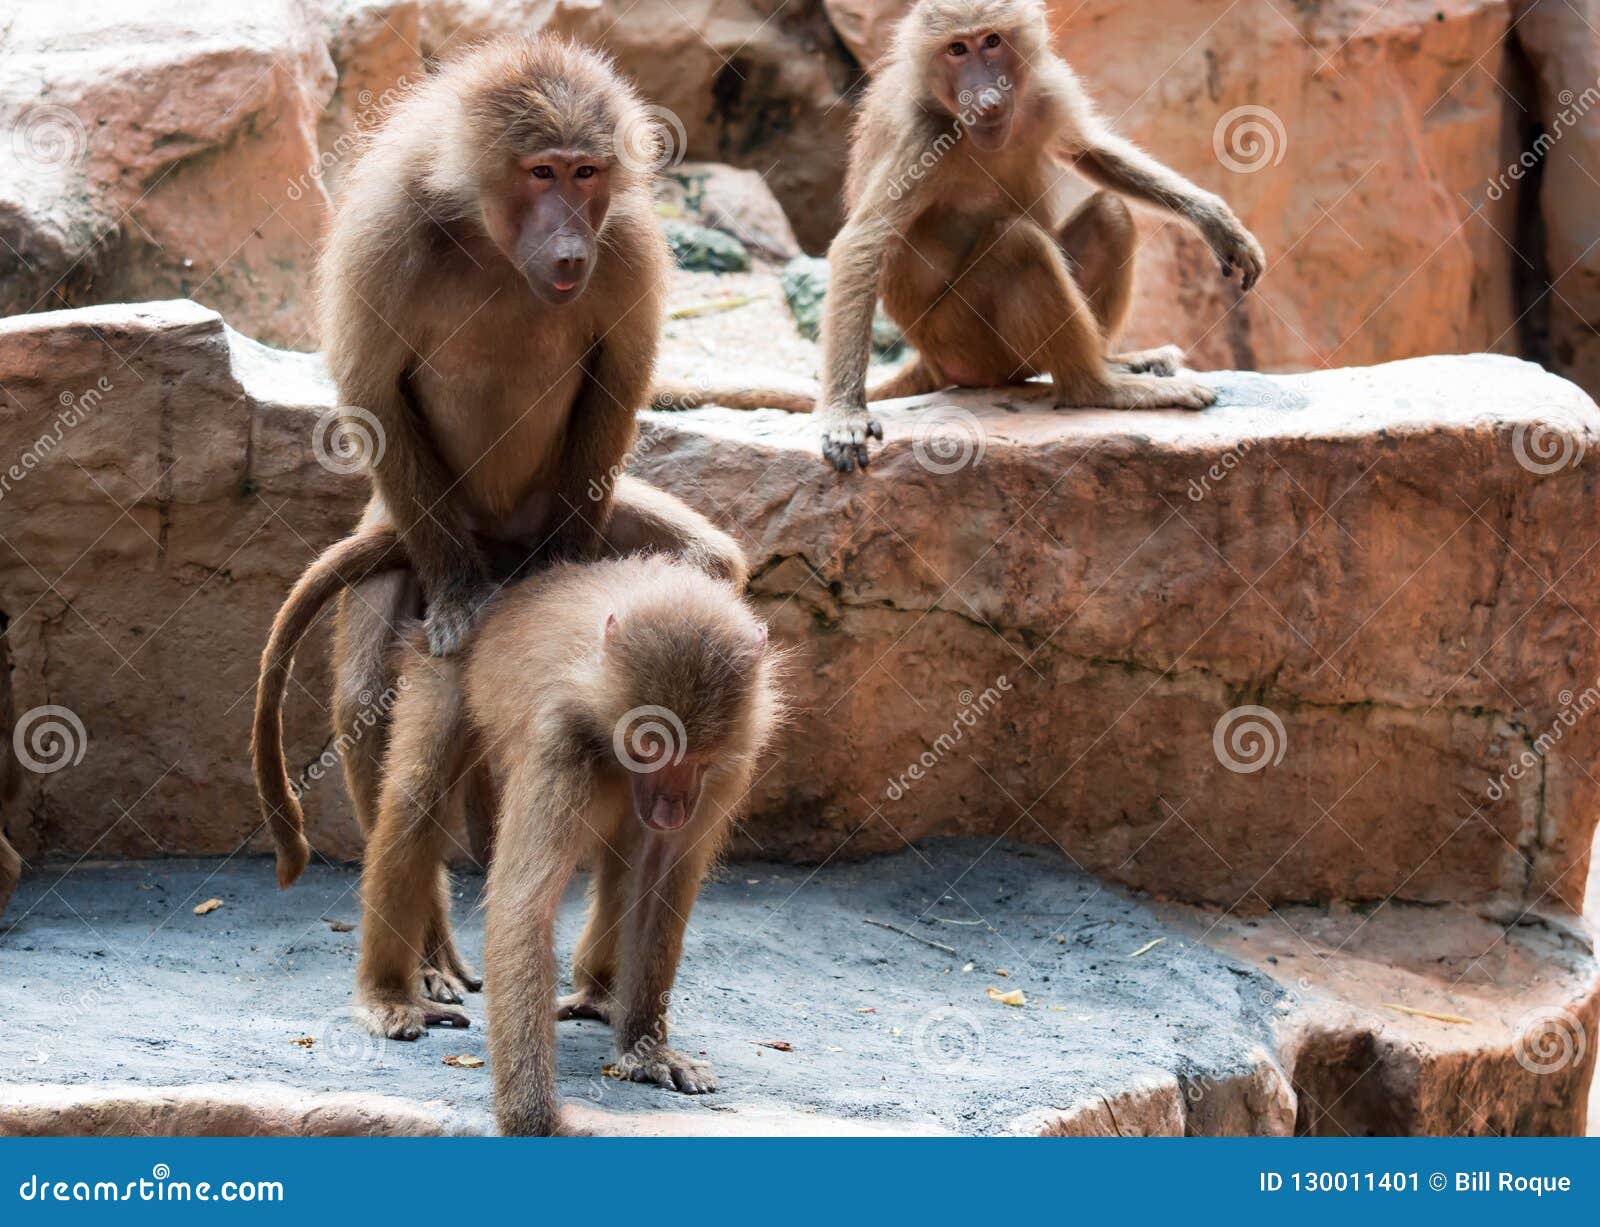 A Couple Of Hamadryas Baboon While Making Out Mating Of Baboons Stock Image Image Of Close 